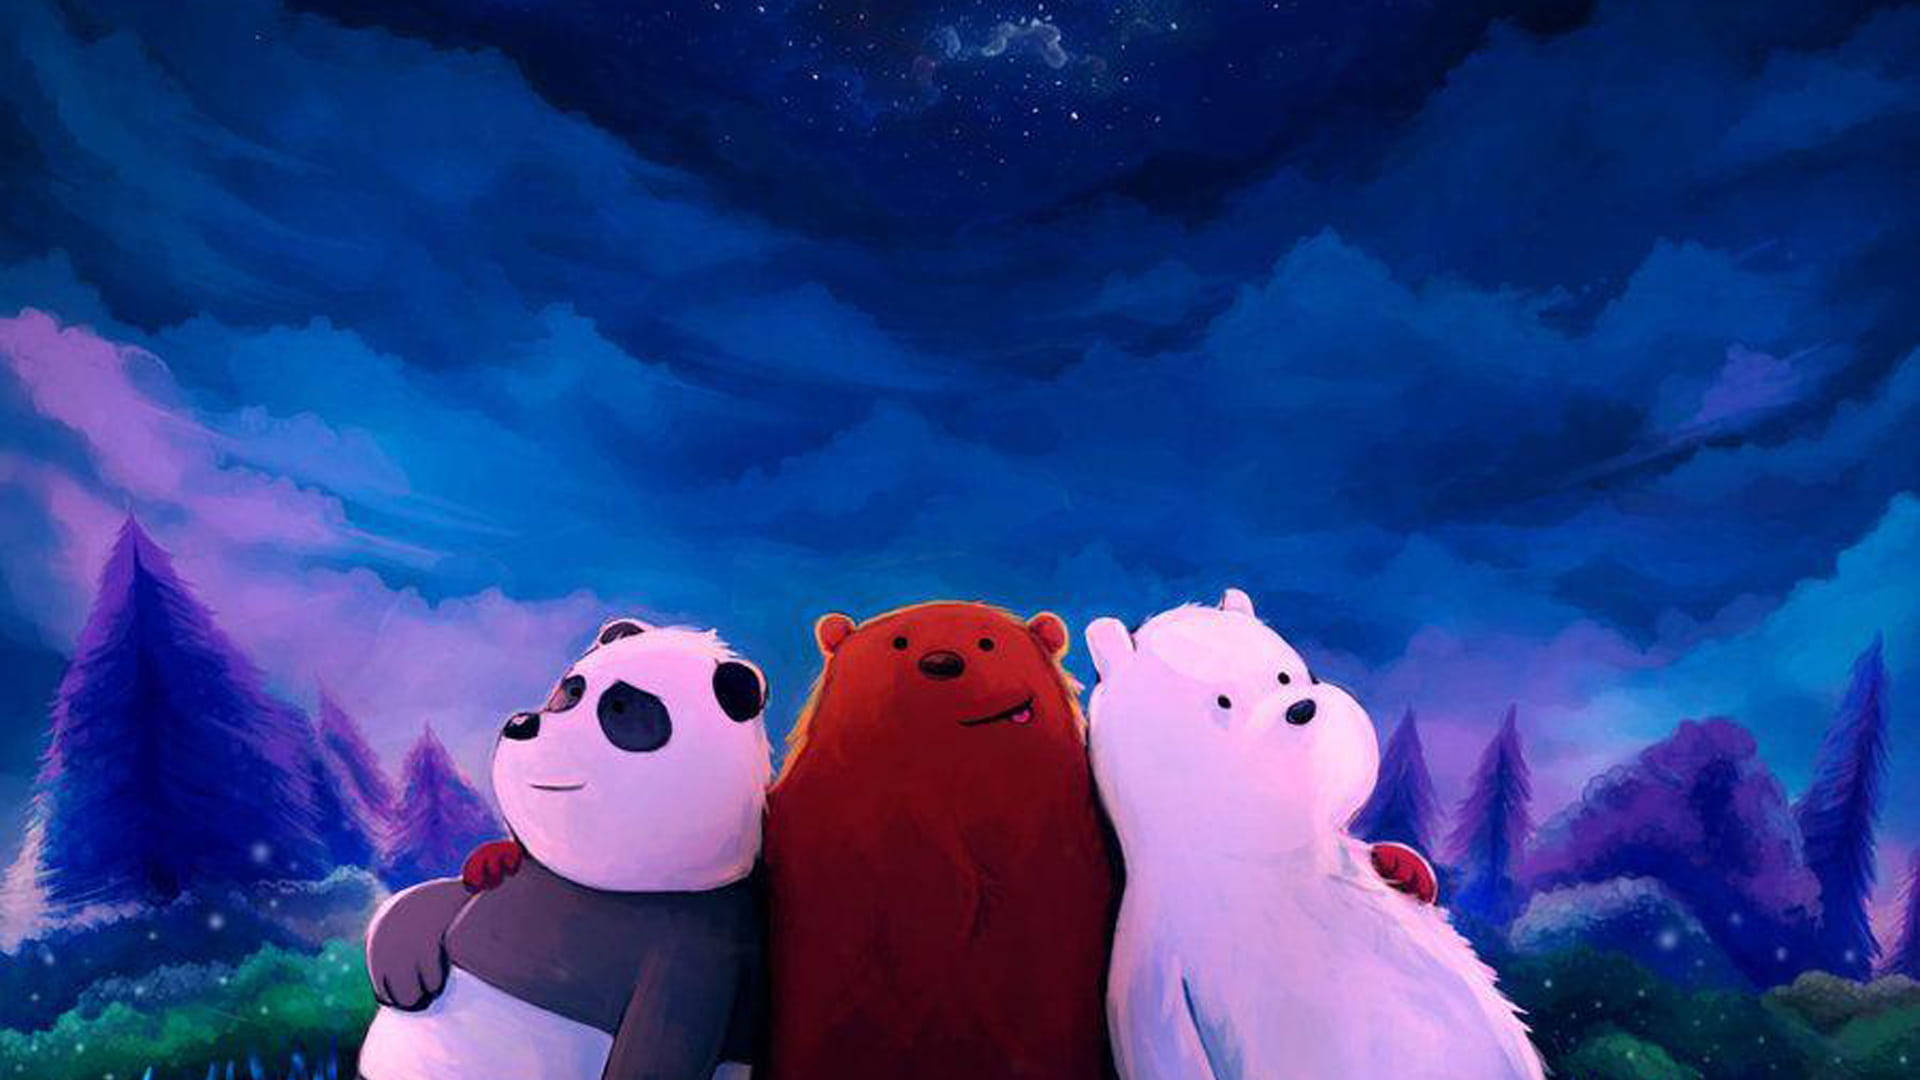 We Bare Bears Aesthetic Pictures Wallpaper